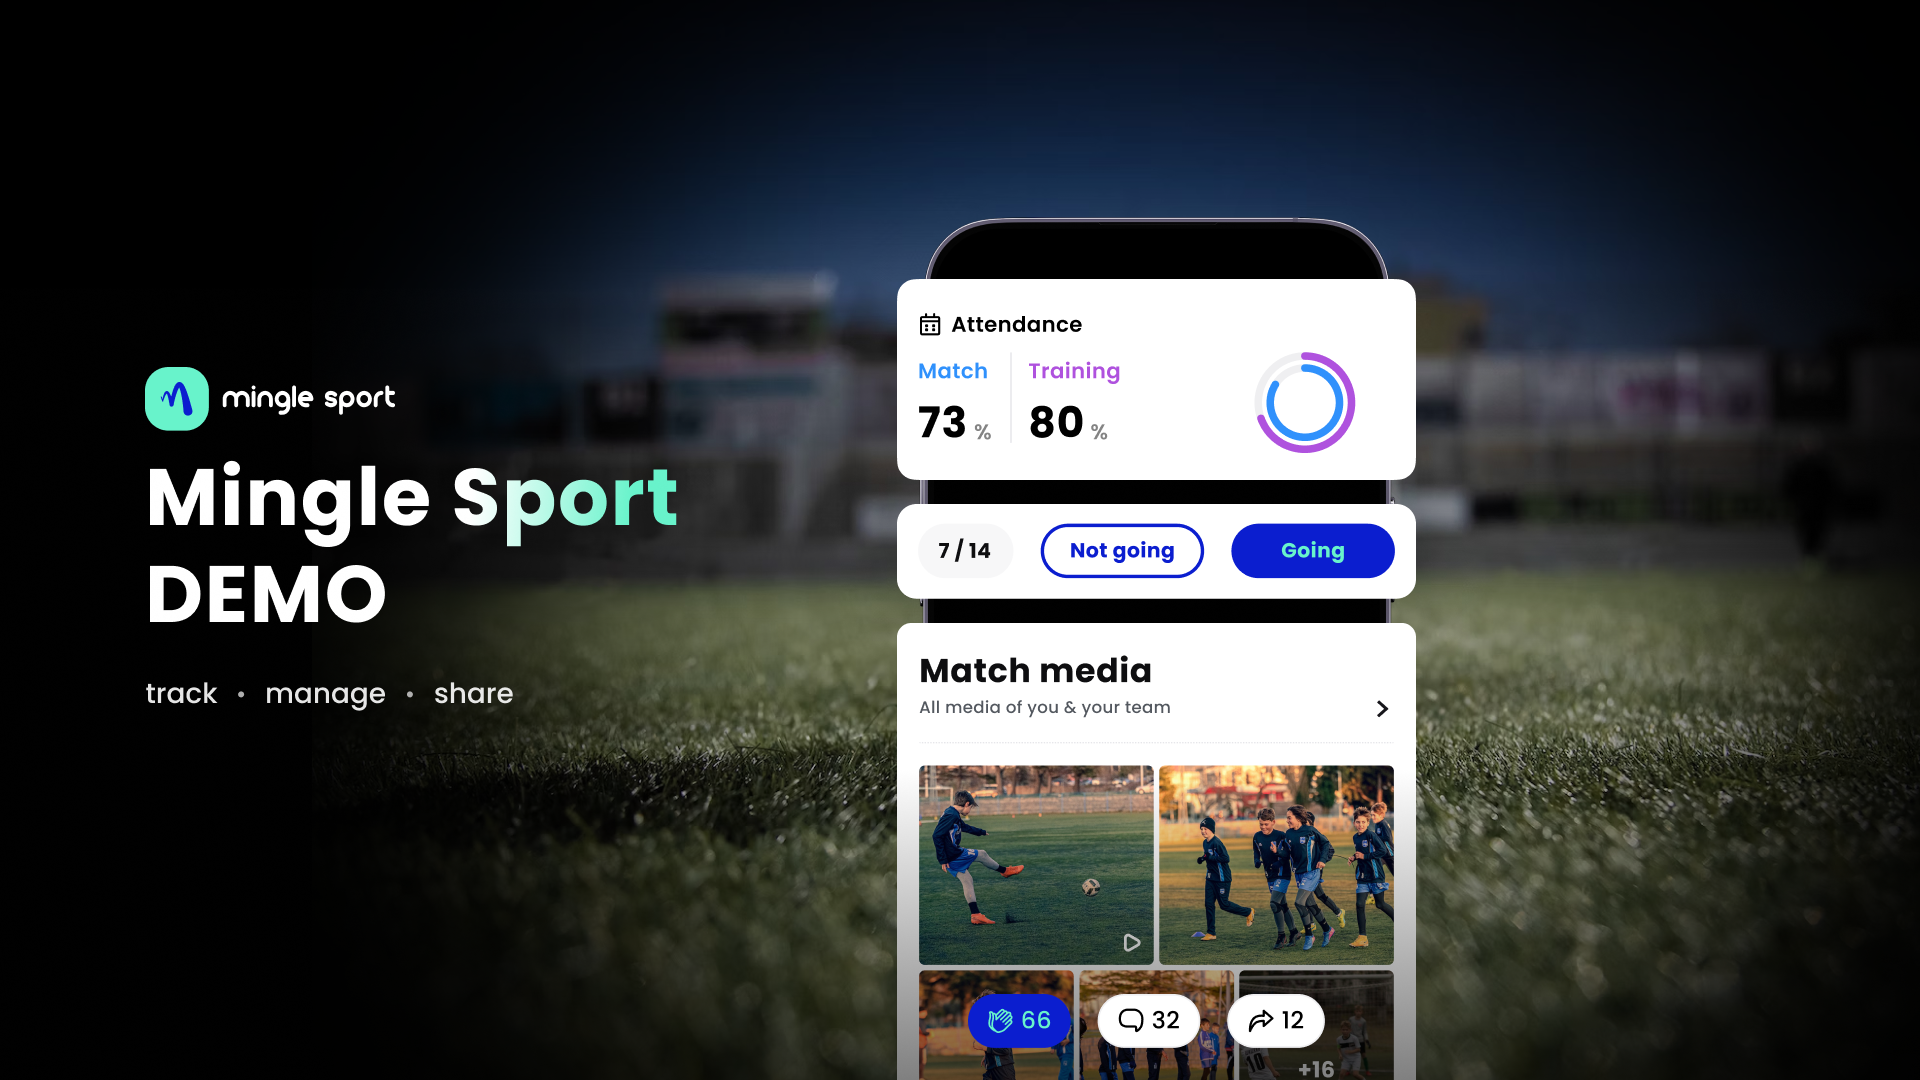 Mingle sport app for soccer teams - demo - key features 